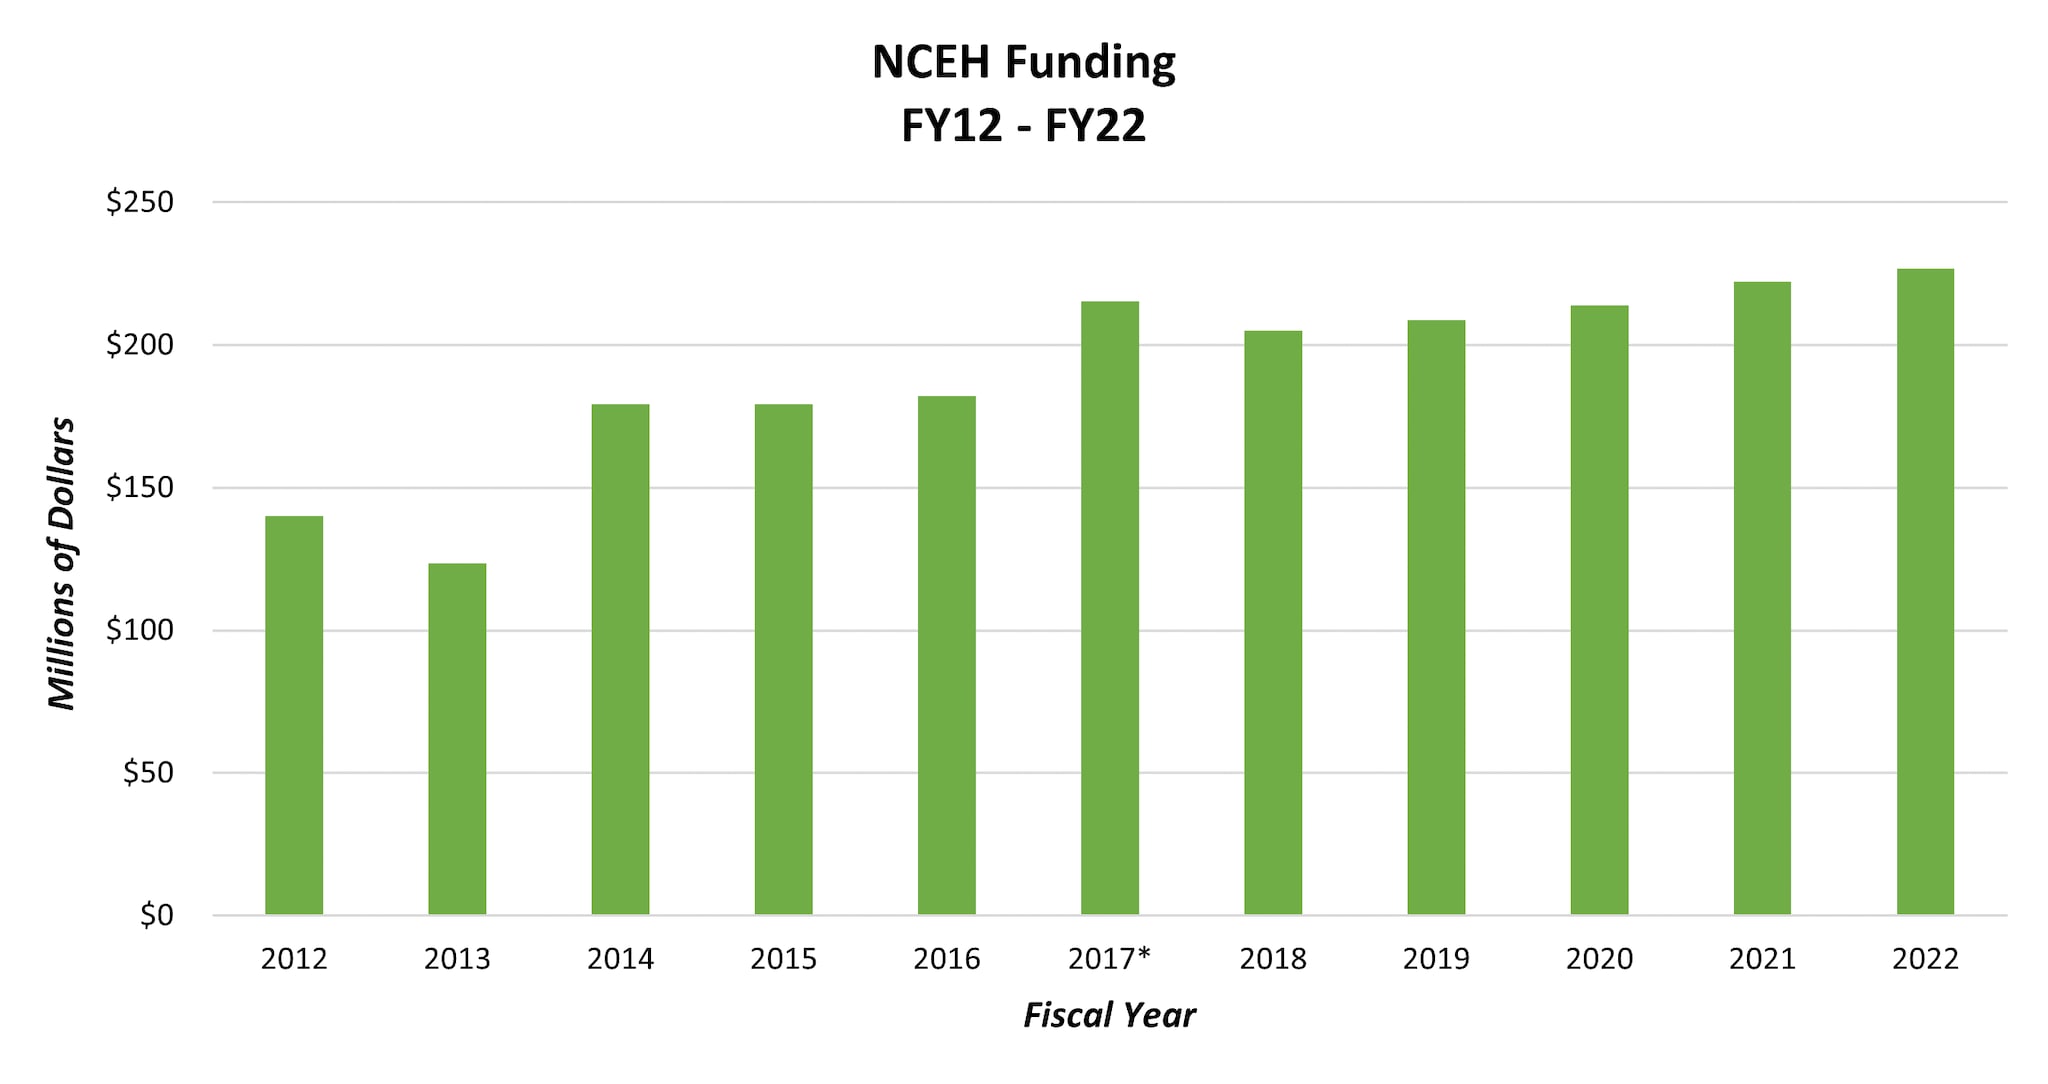 Bar chart showing NCEH funding from FY 2012 through FY 2022